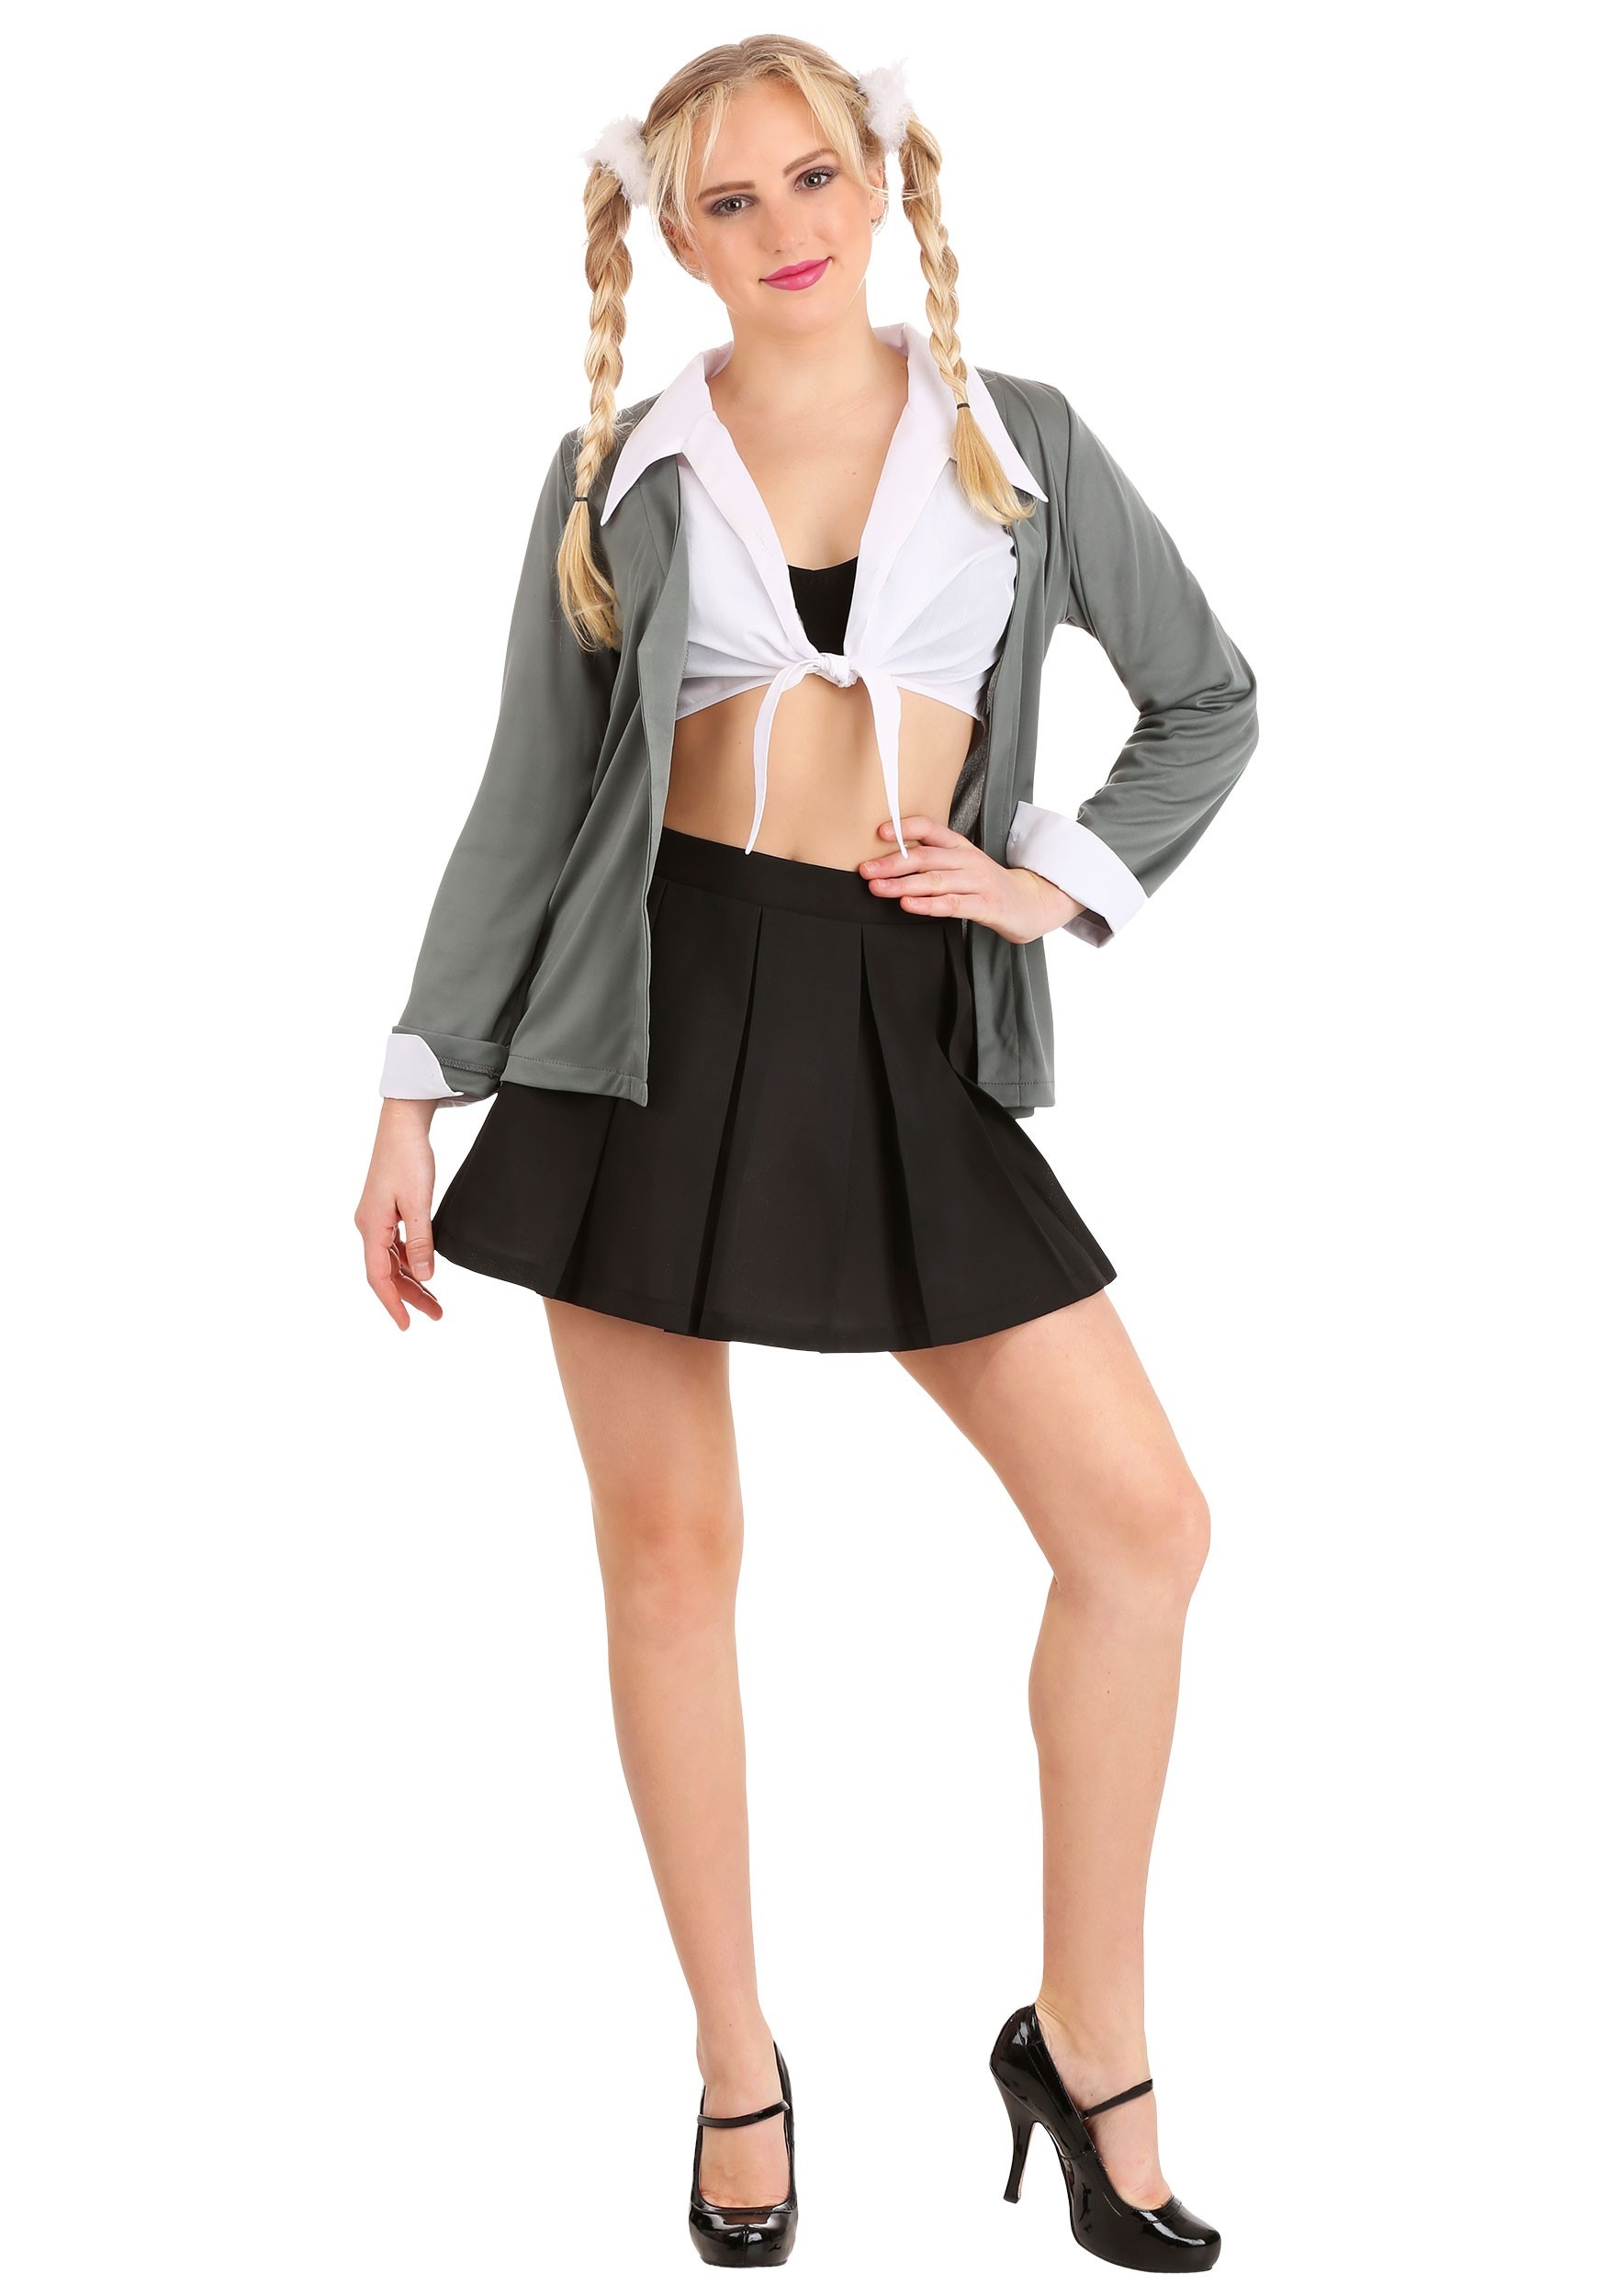 Photos - Fancy Dress more. FUN Costumes One More Time Pop Singer Women's Costume Black/Gray/W 